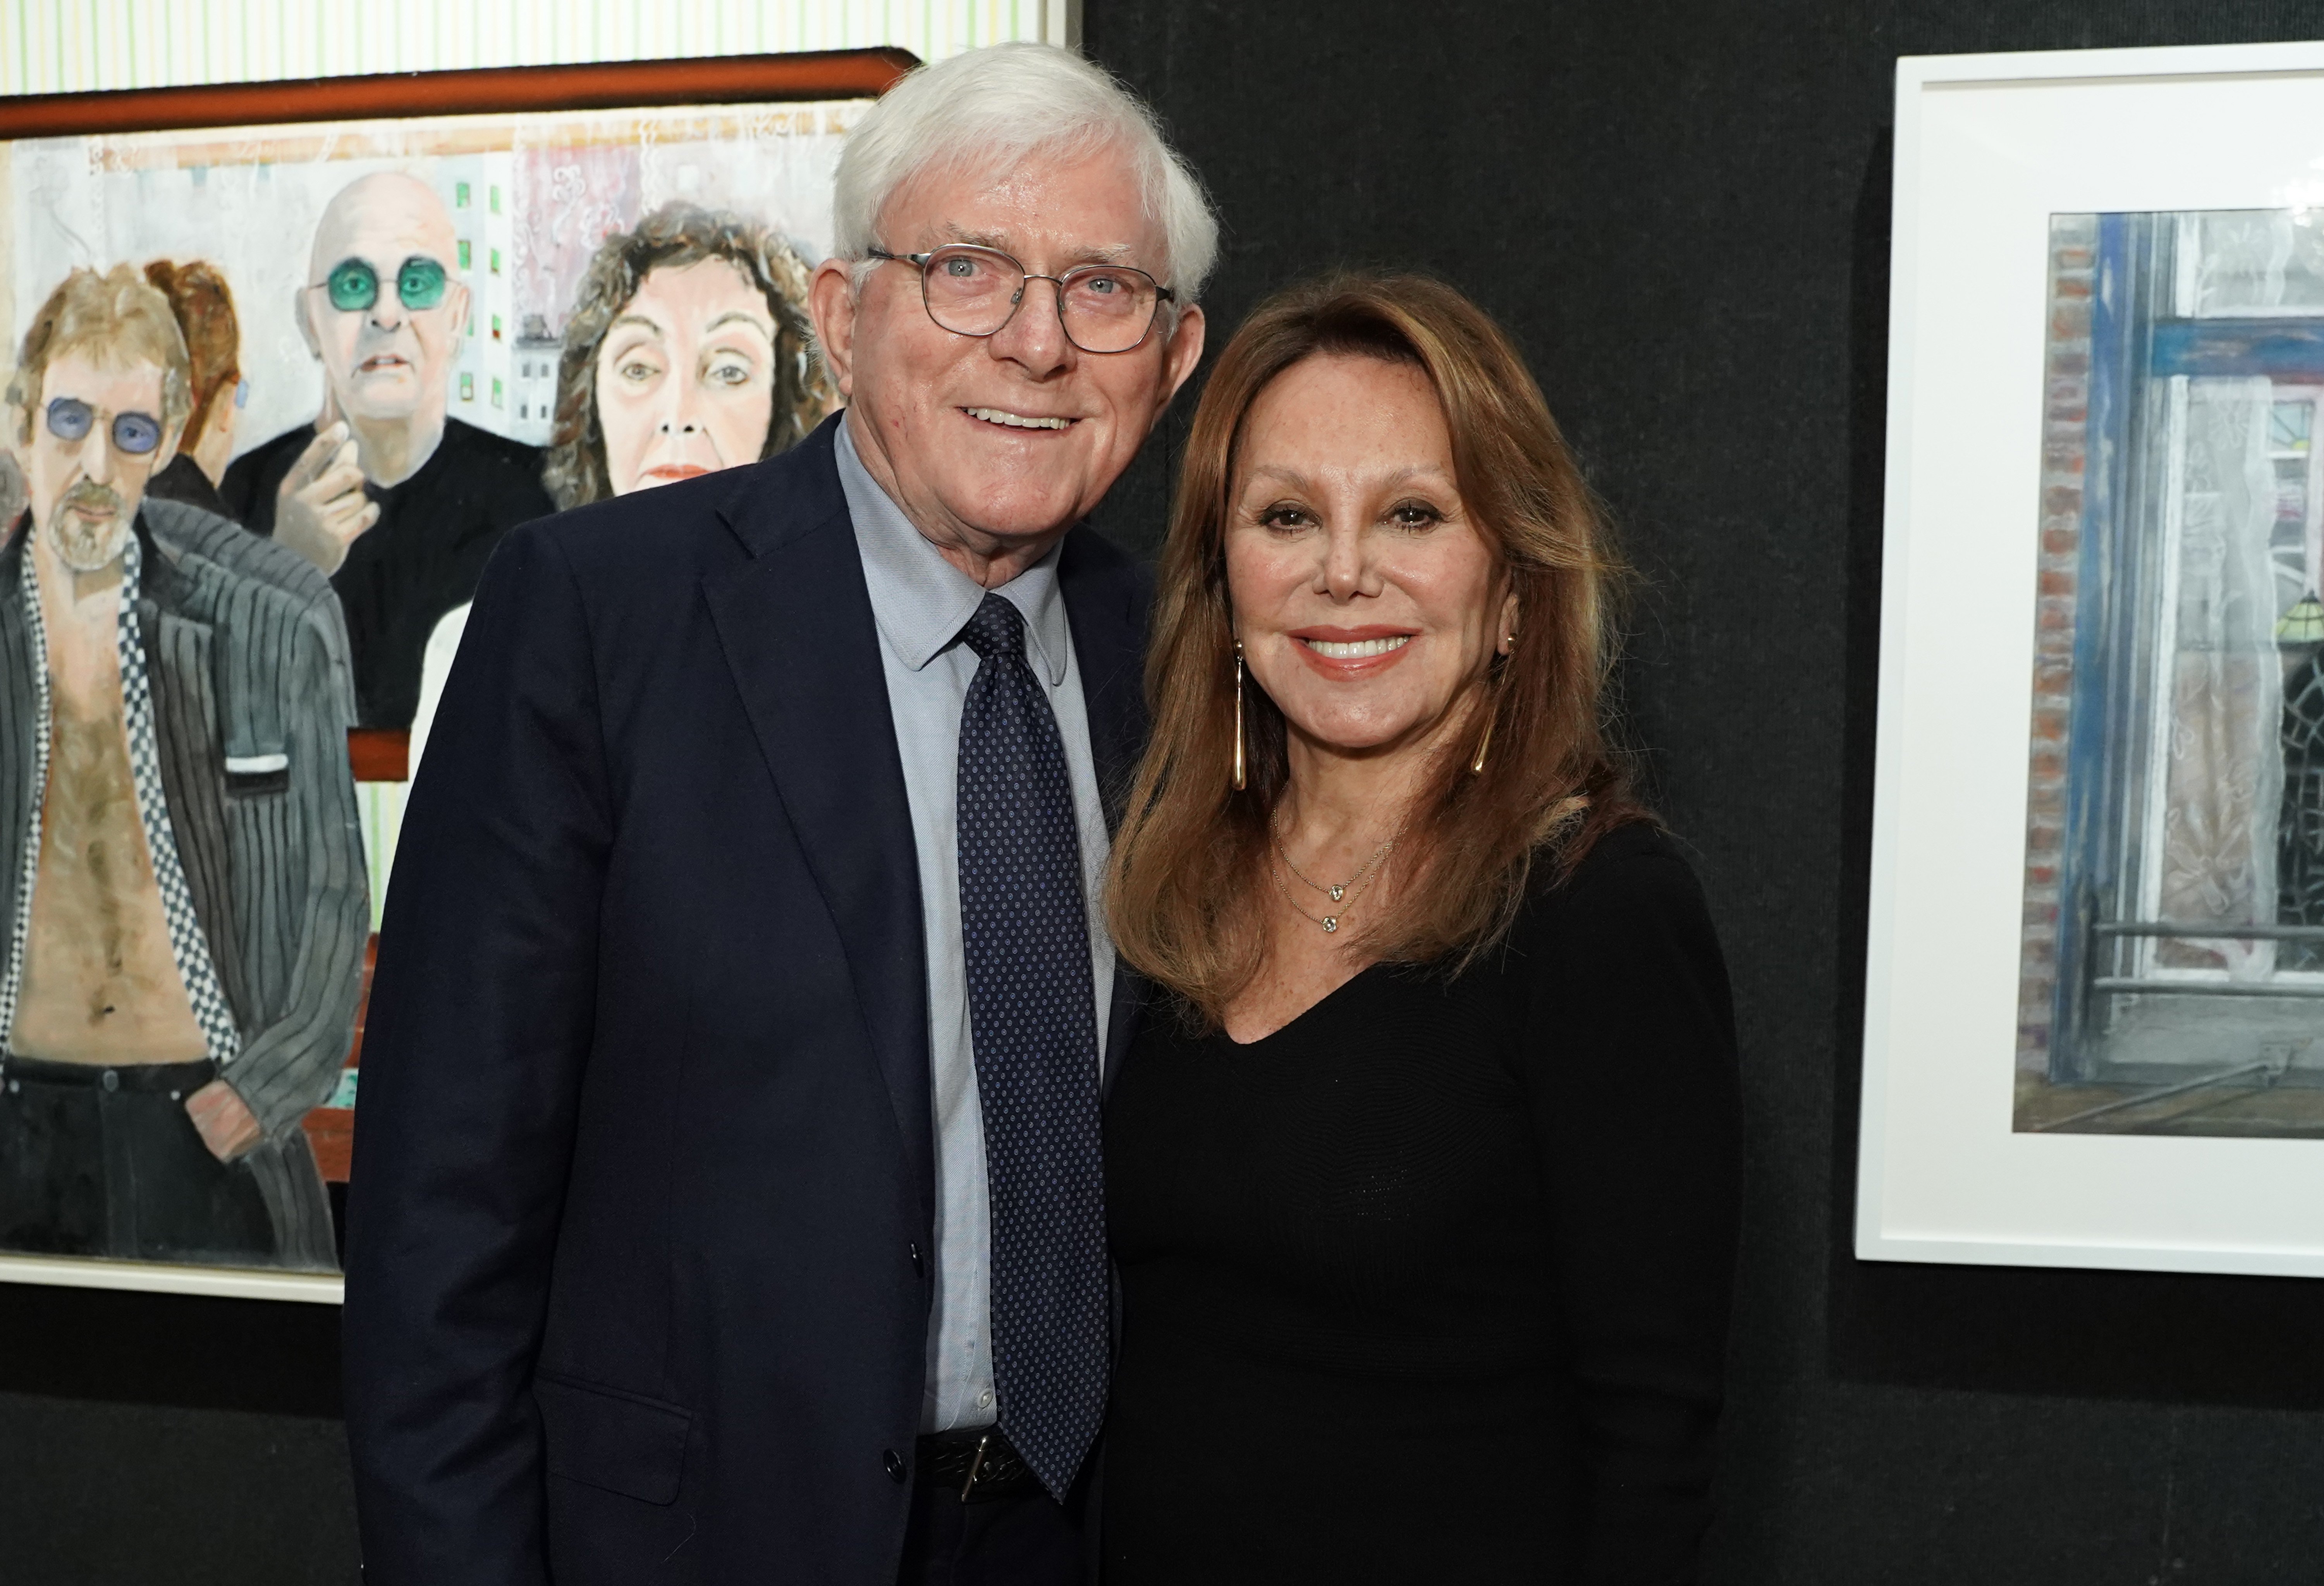 Marlo Thomas  and Phil Donahue in New York in 2019 | Source: Getty Images